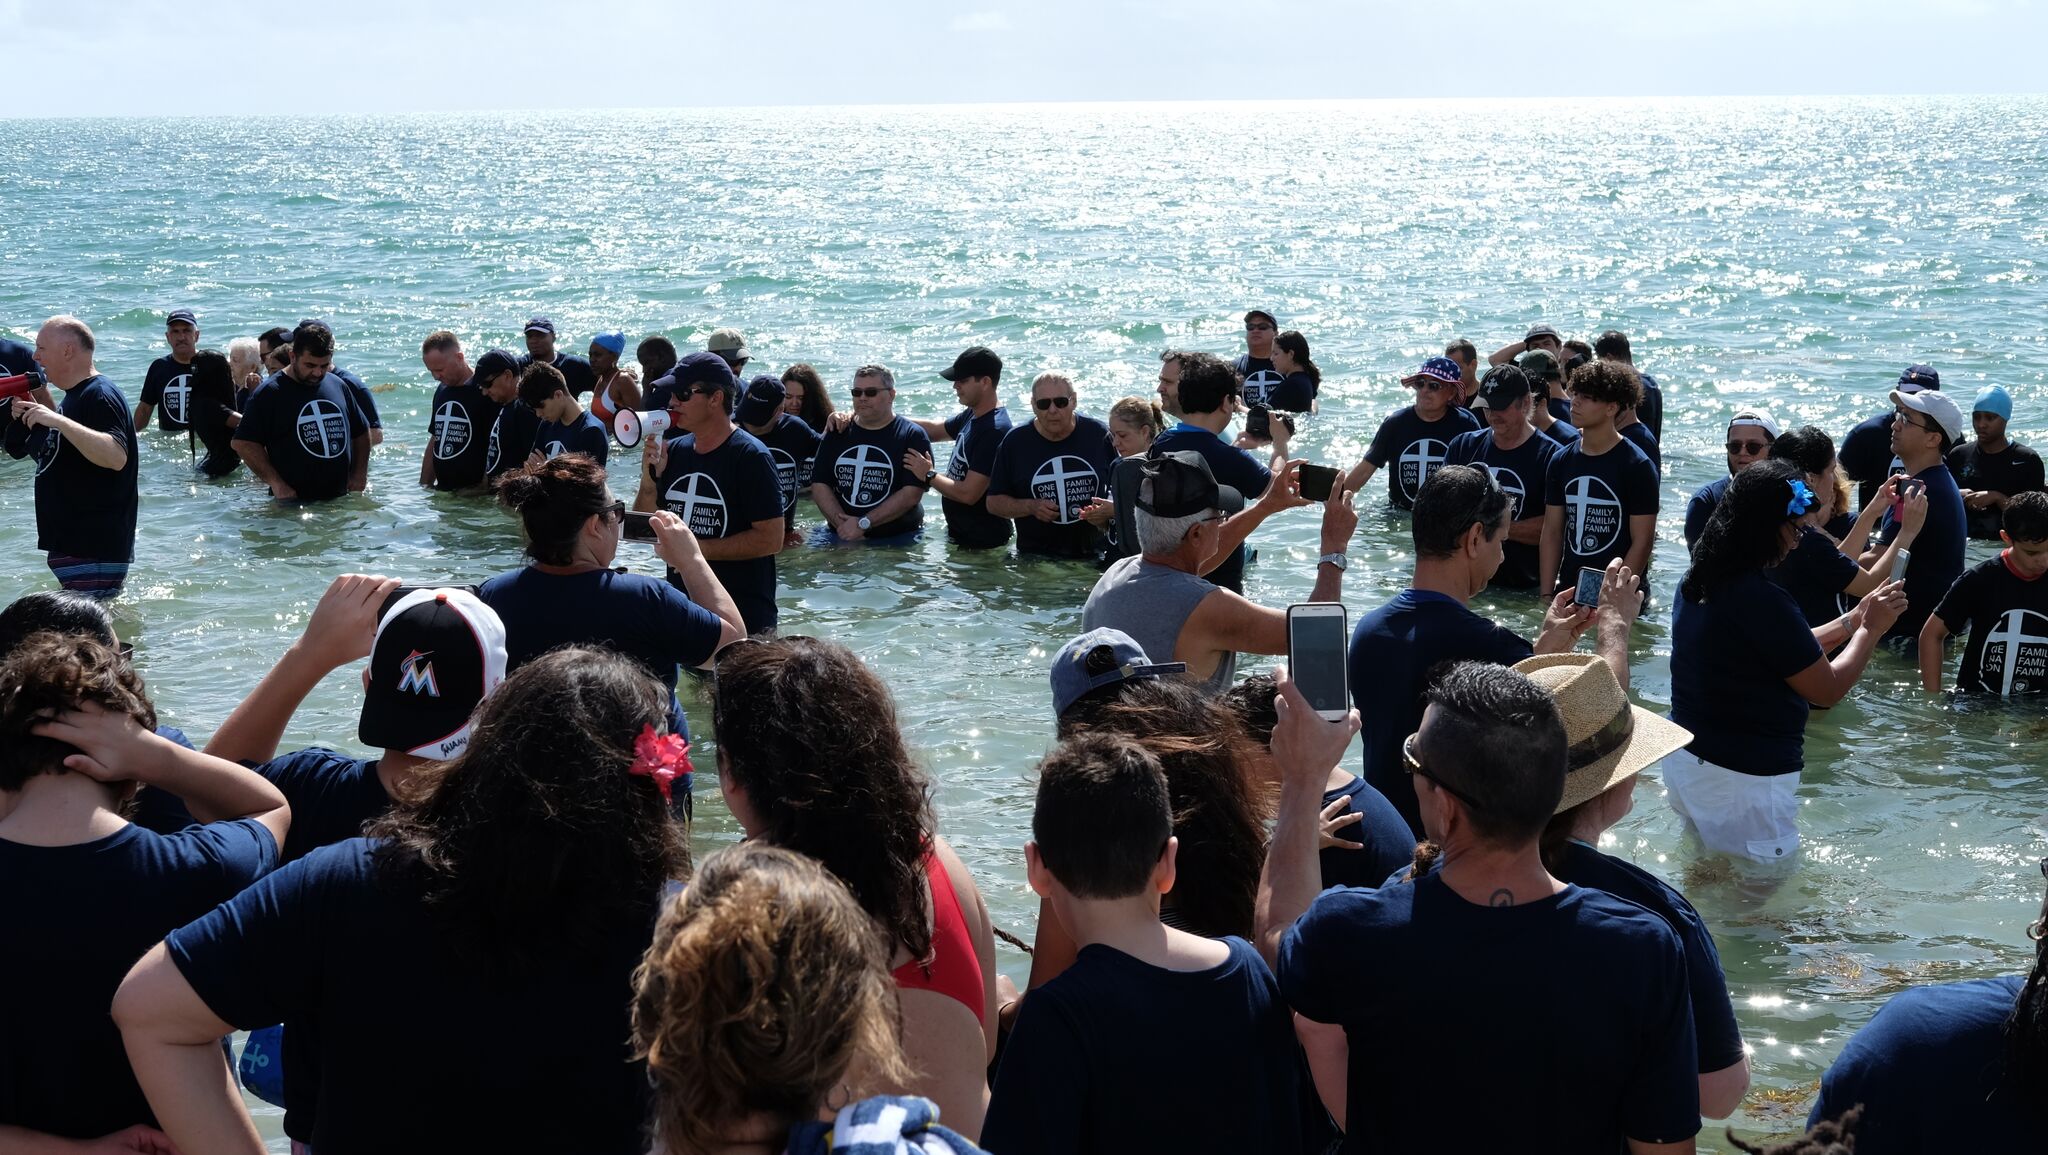 Florida Baptist Convention, Acts 2:41 Sunday, Beach Baptism, One Family